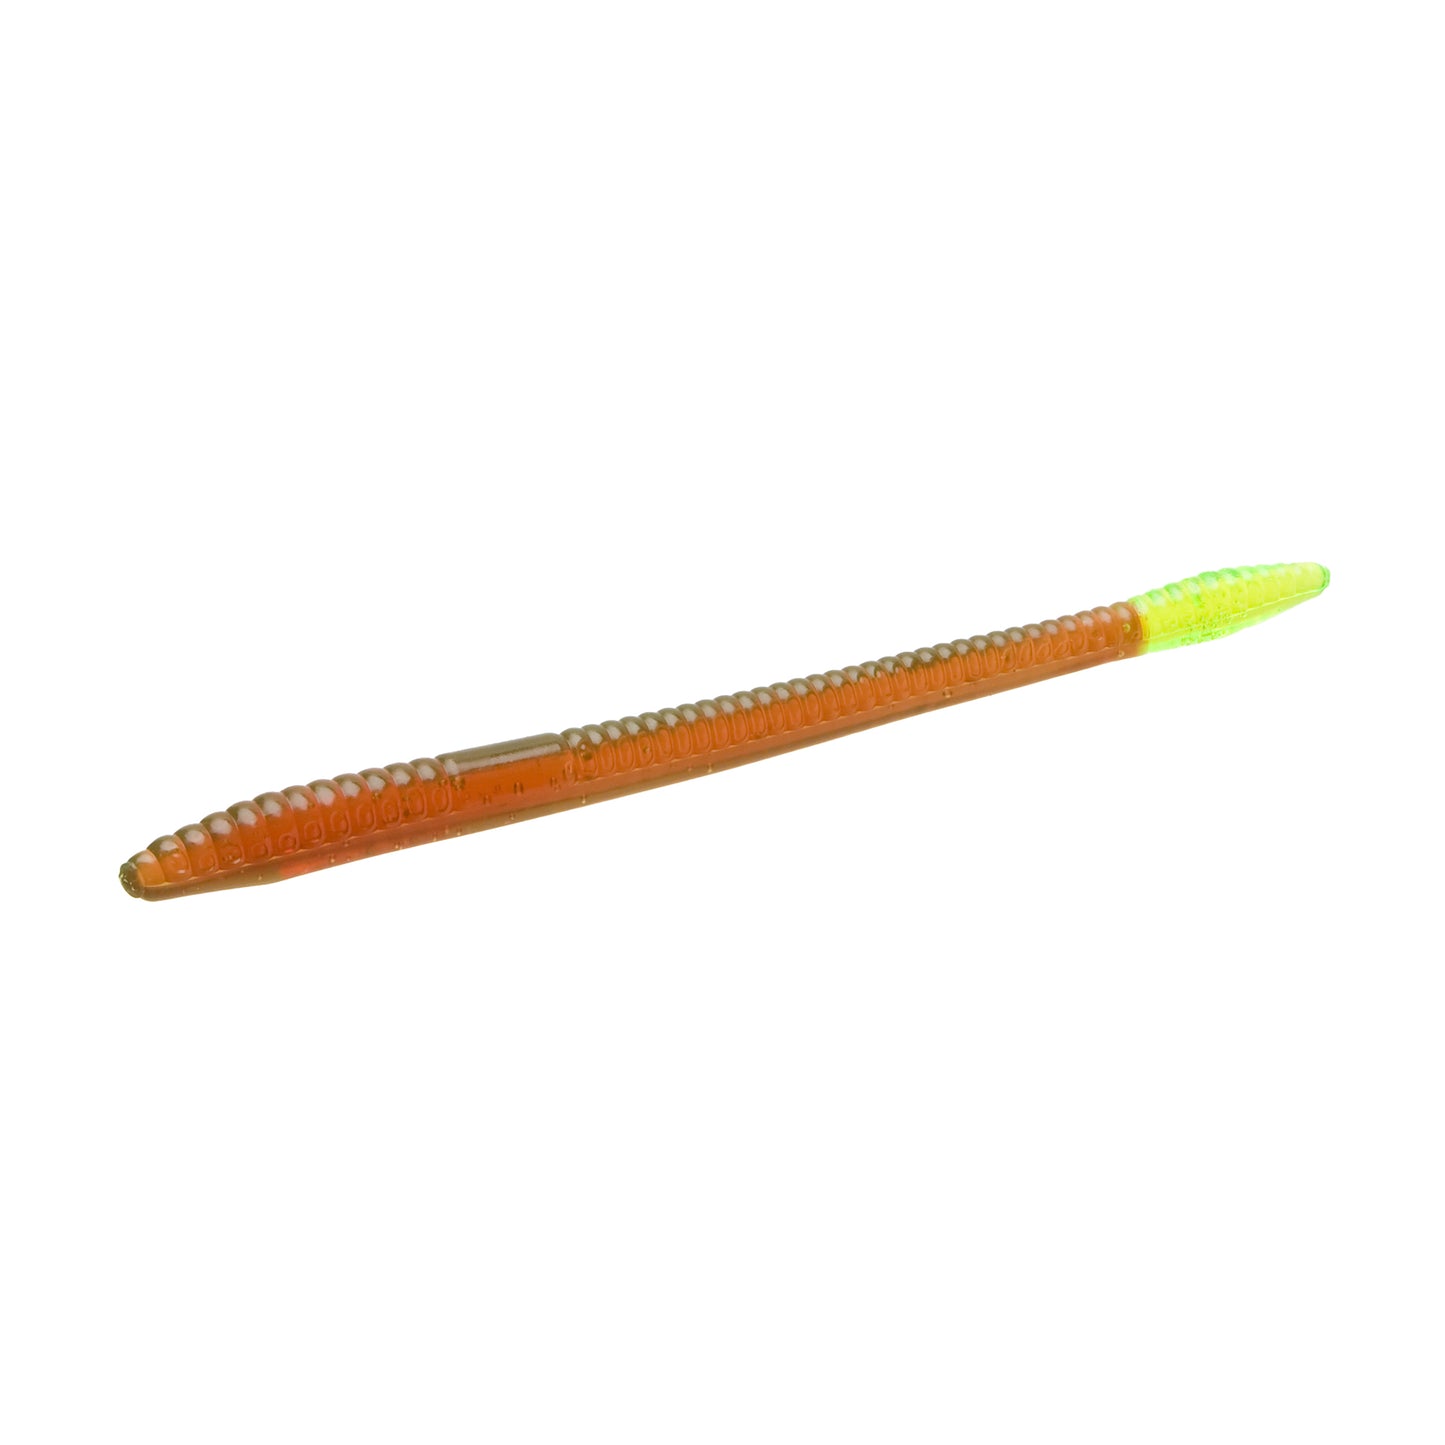 Zoom Finesse 4.5" Worm